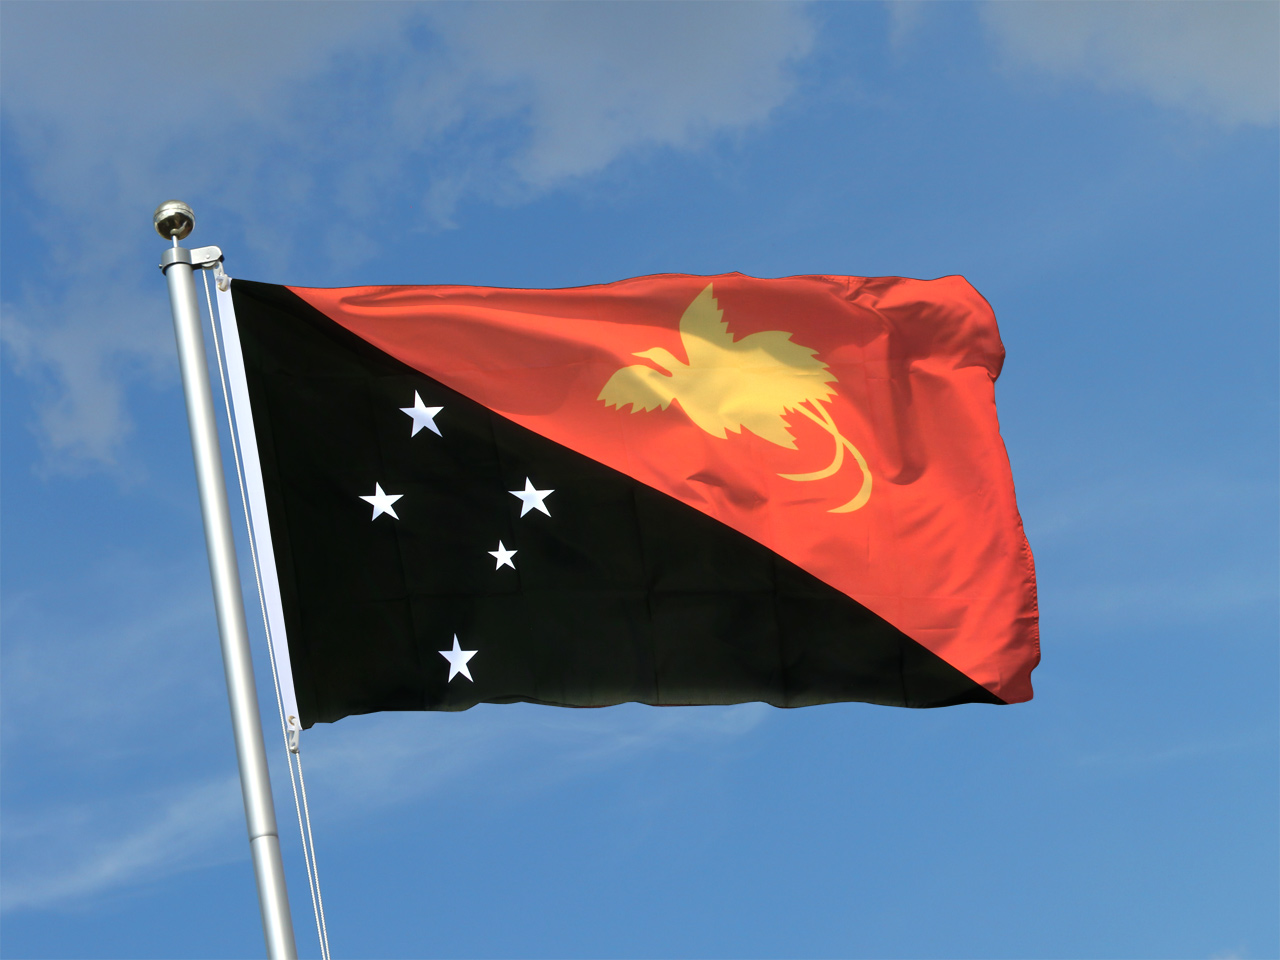 Papua New Guinea Flag for Sale - Buy online at Royal-Flags